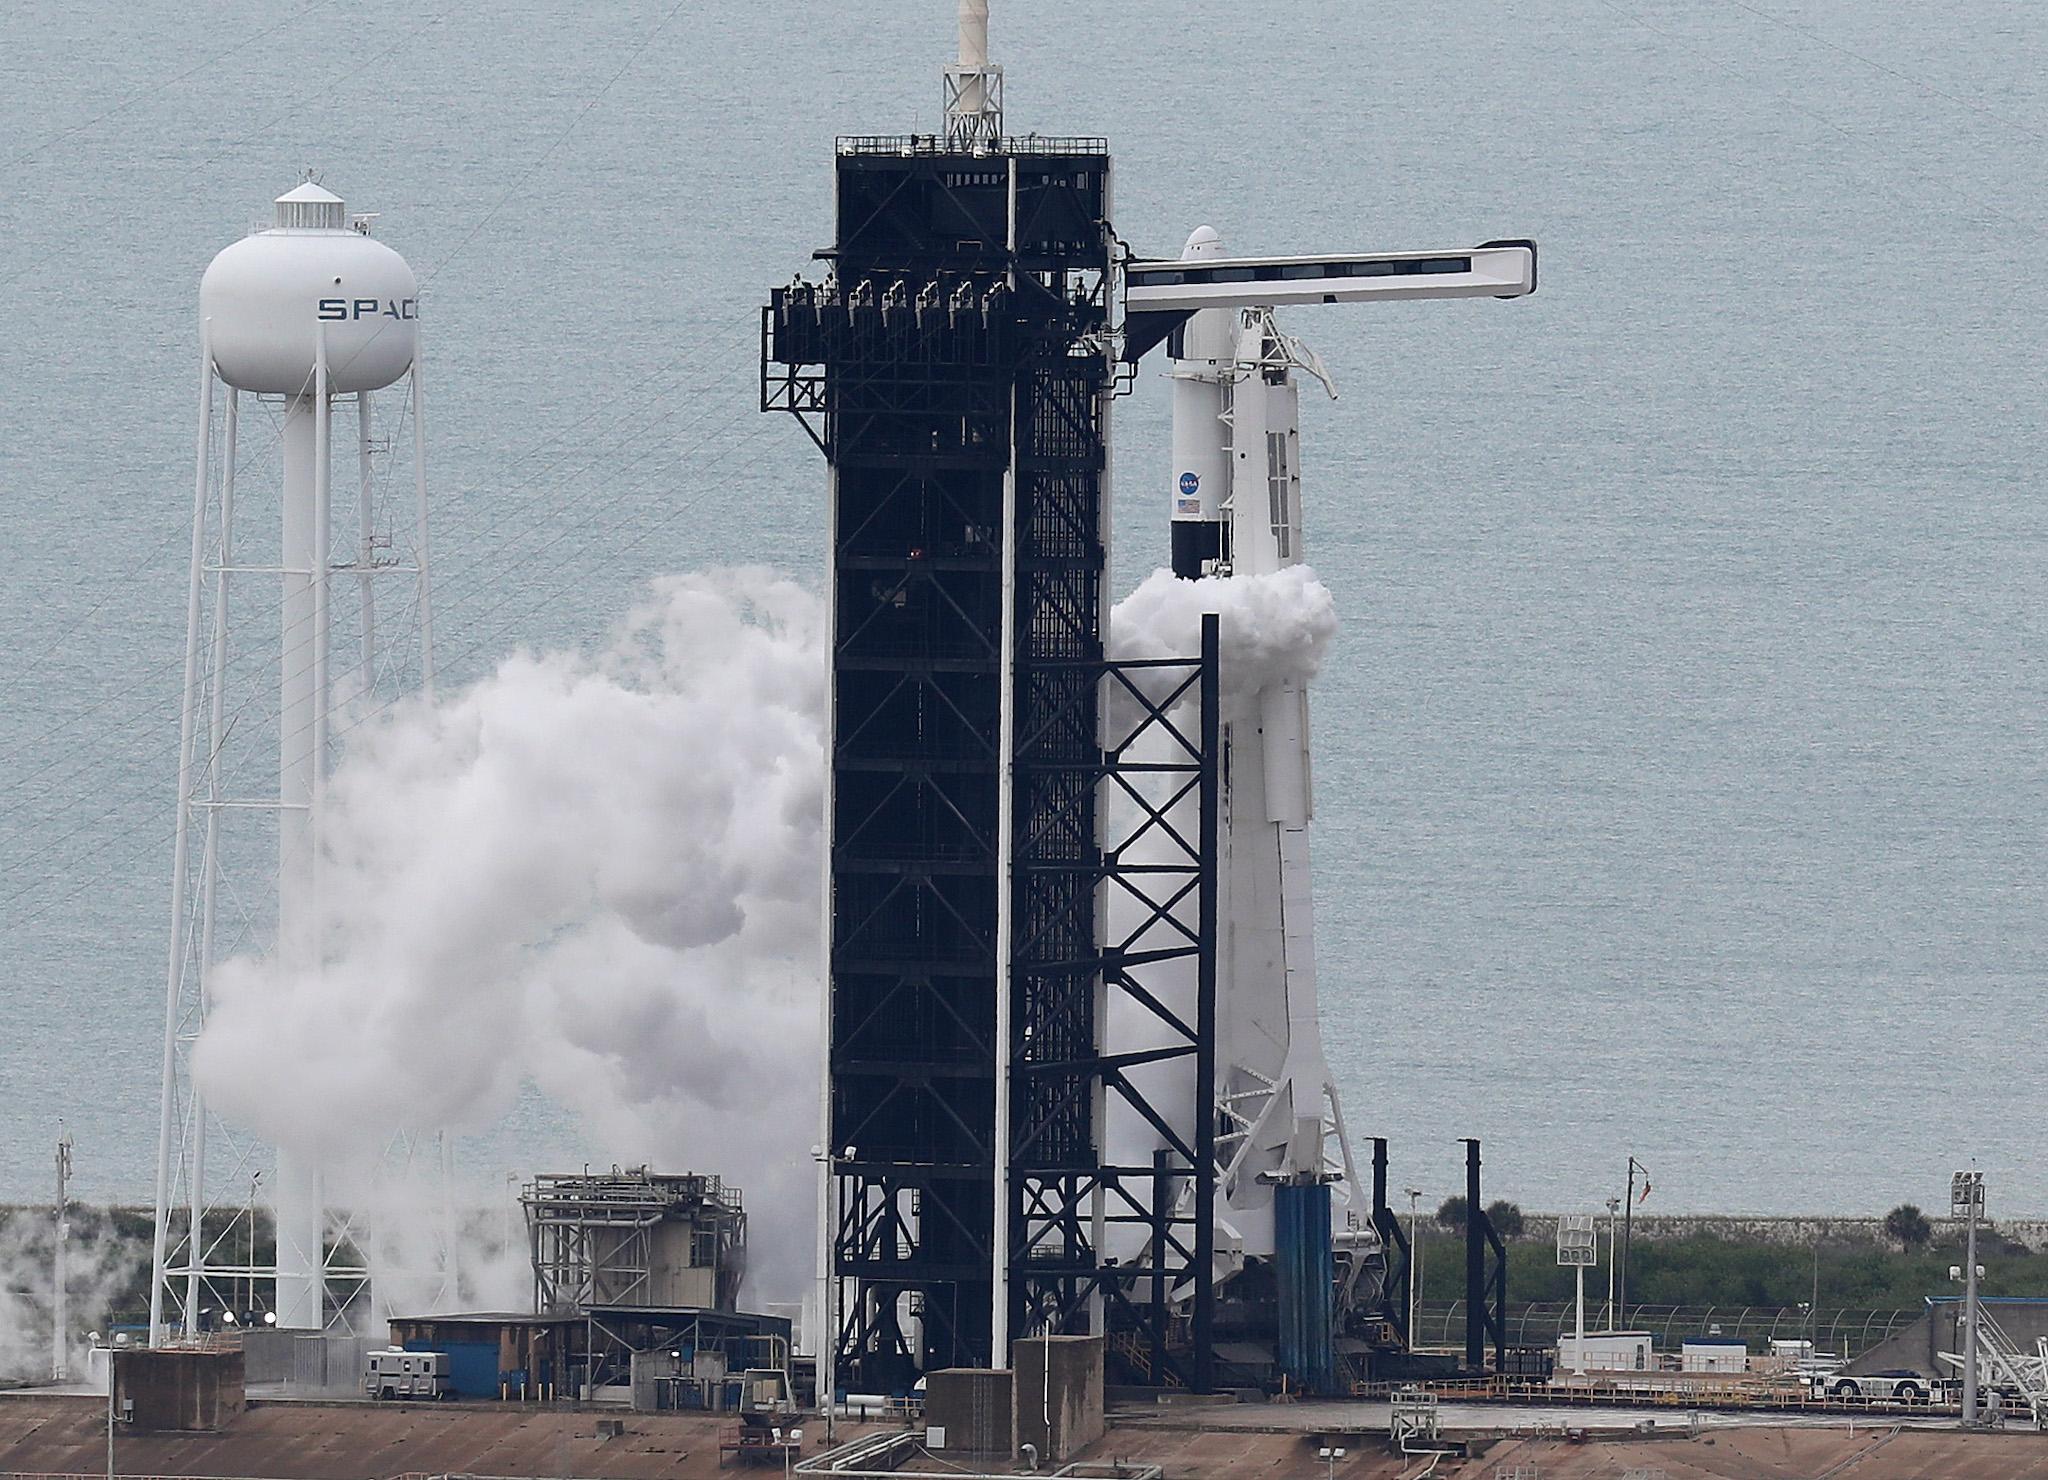 Moments before launching NASA scrubbed today's launch of the SpaceX Falcon 9 rocket